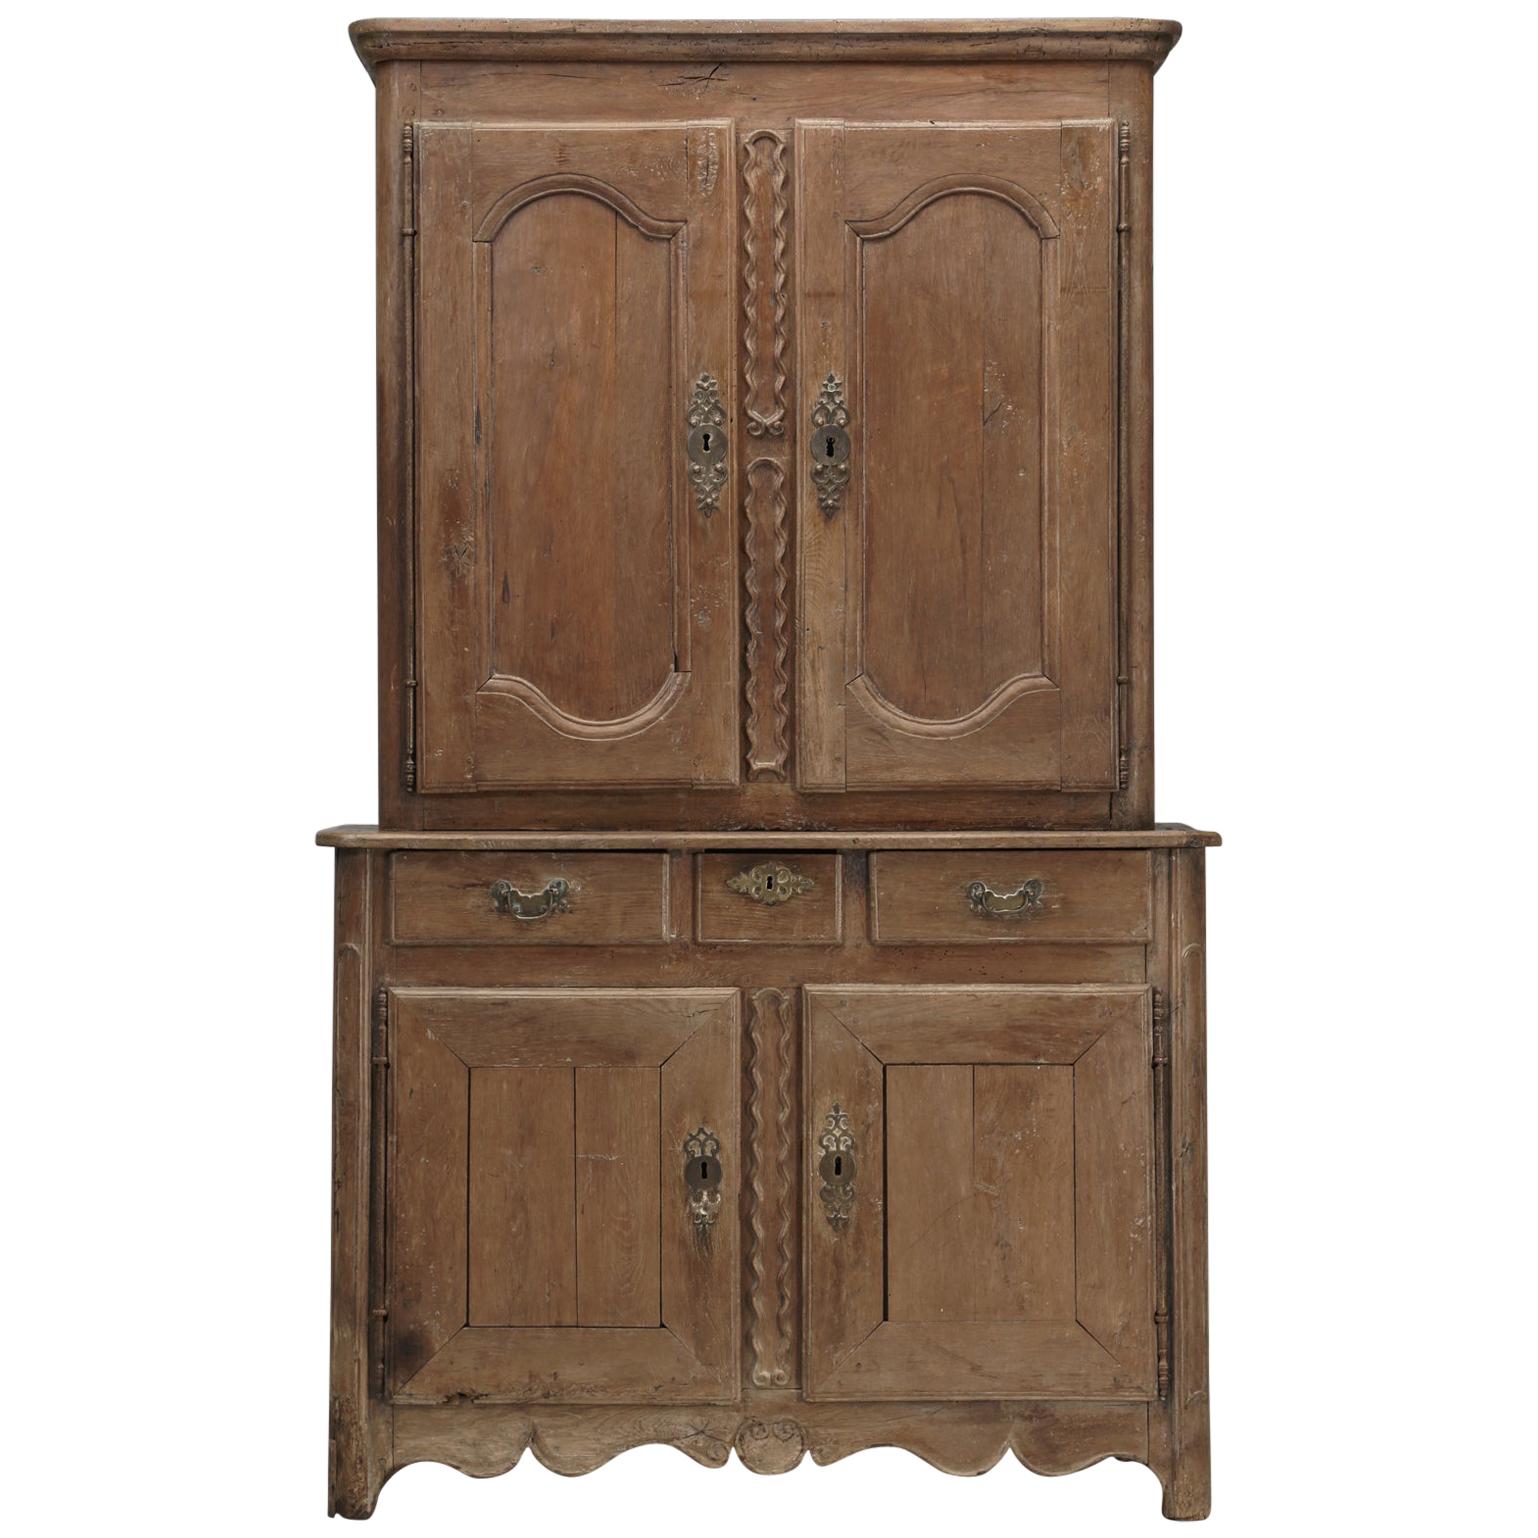 Antique French Deux Corp 'Cupboard' in Original Finish from Chateau Unrestored For Sale